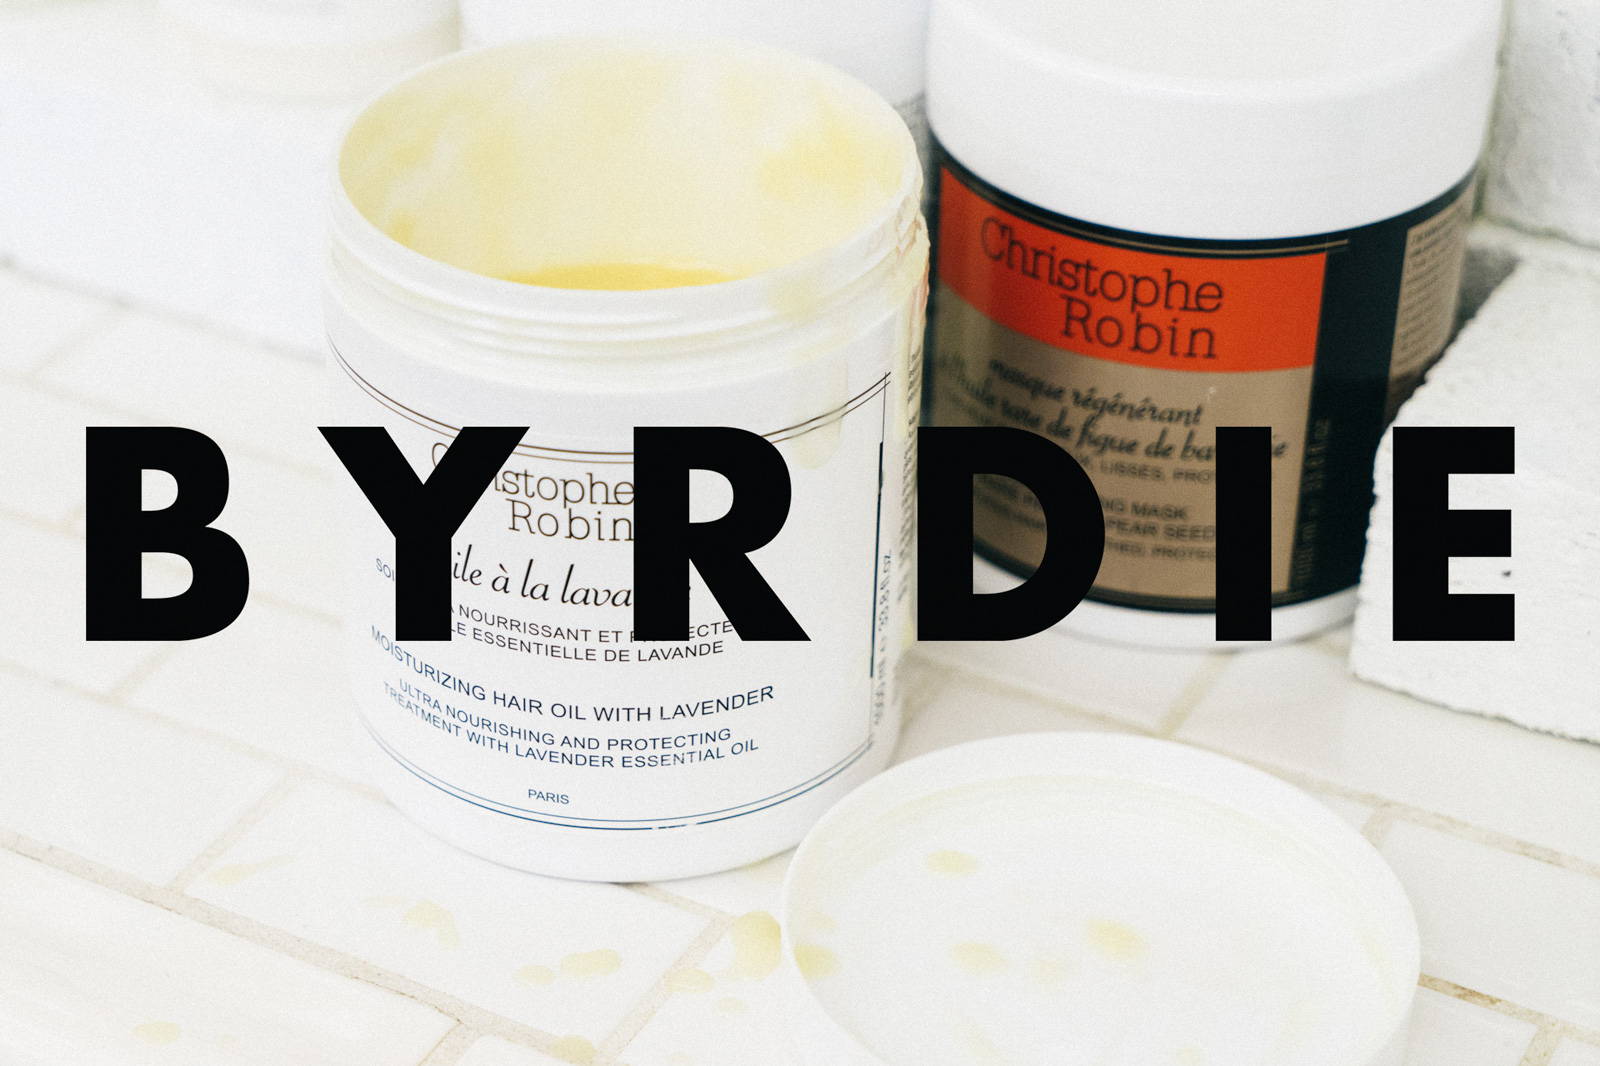 Byrdie Beauty press image of products used for Christophe Robin treatment